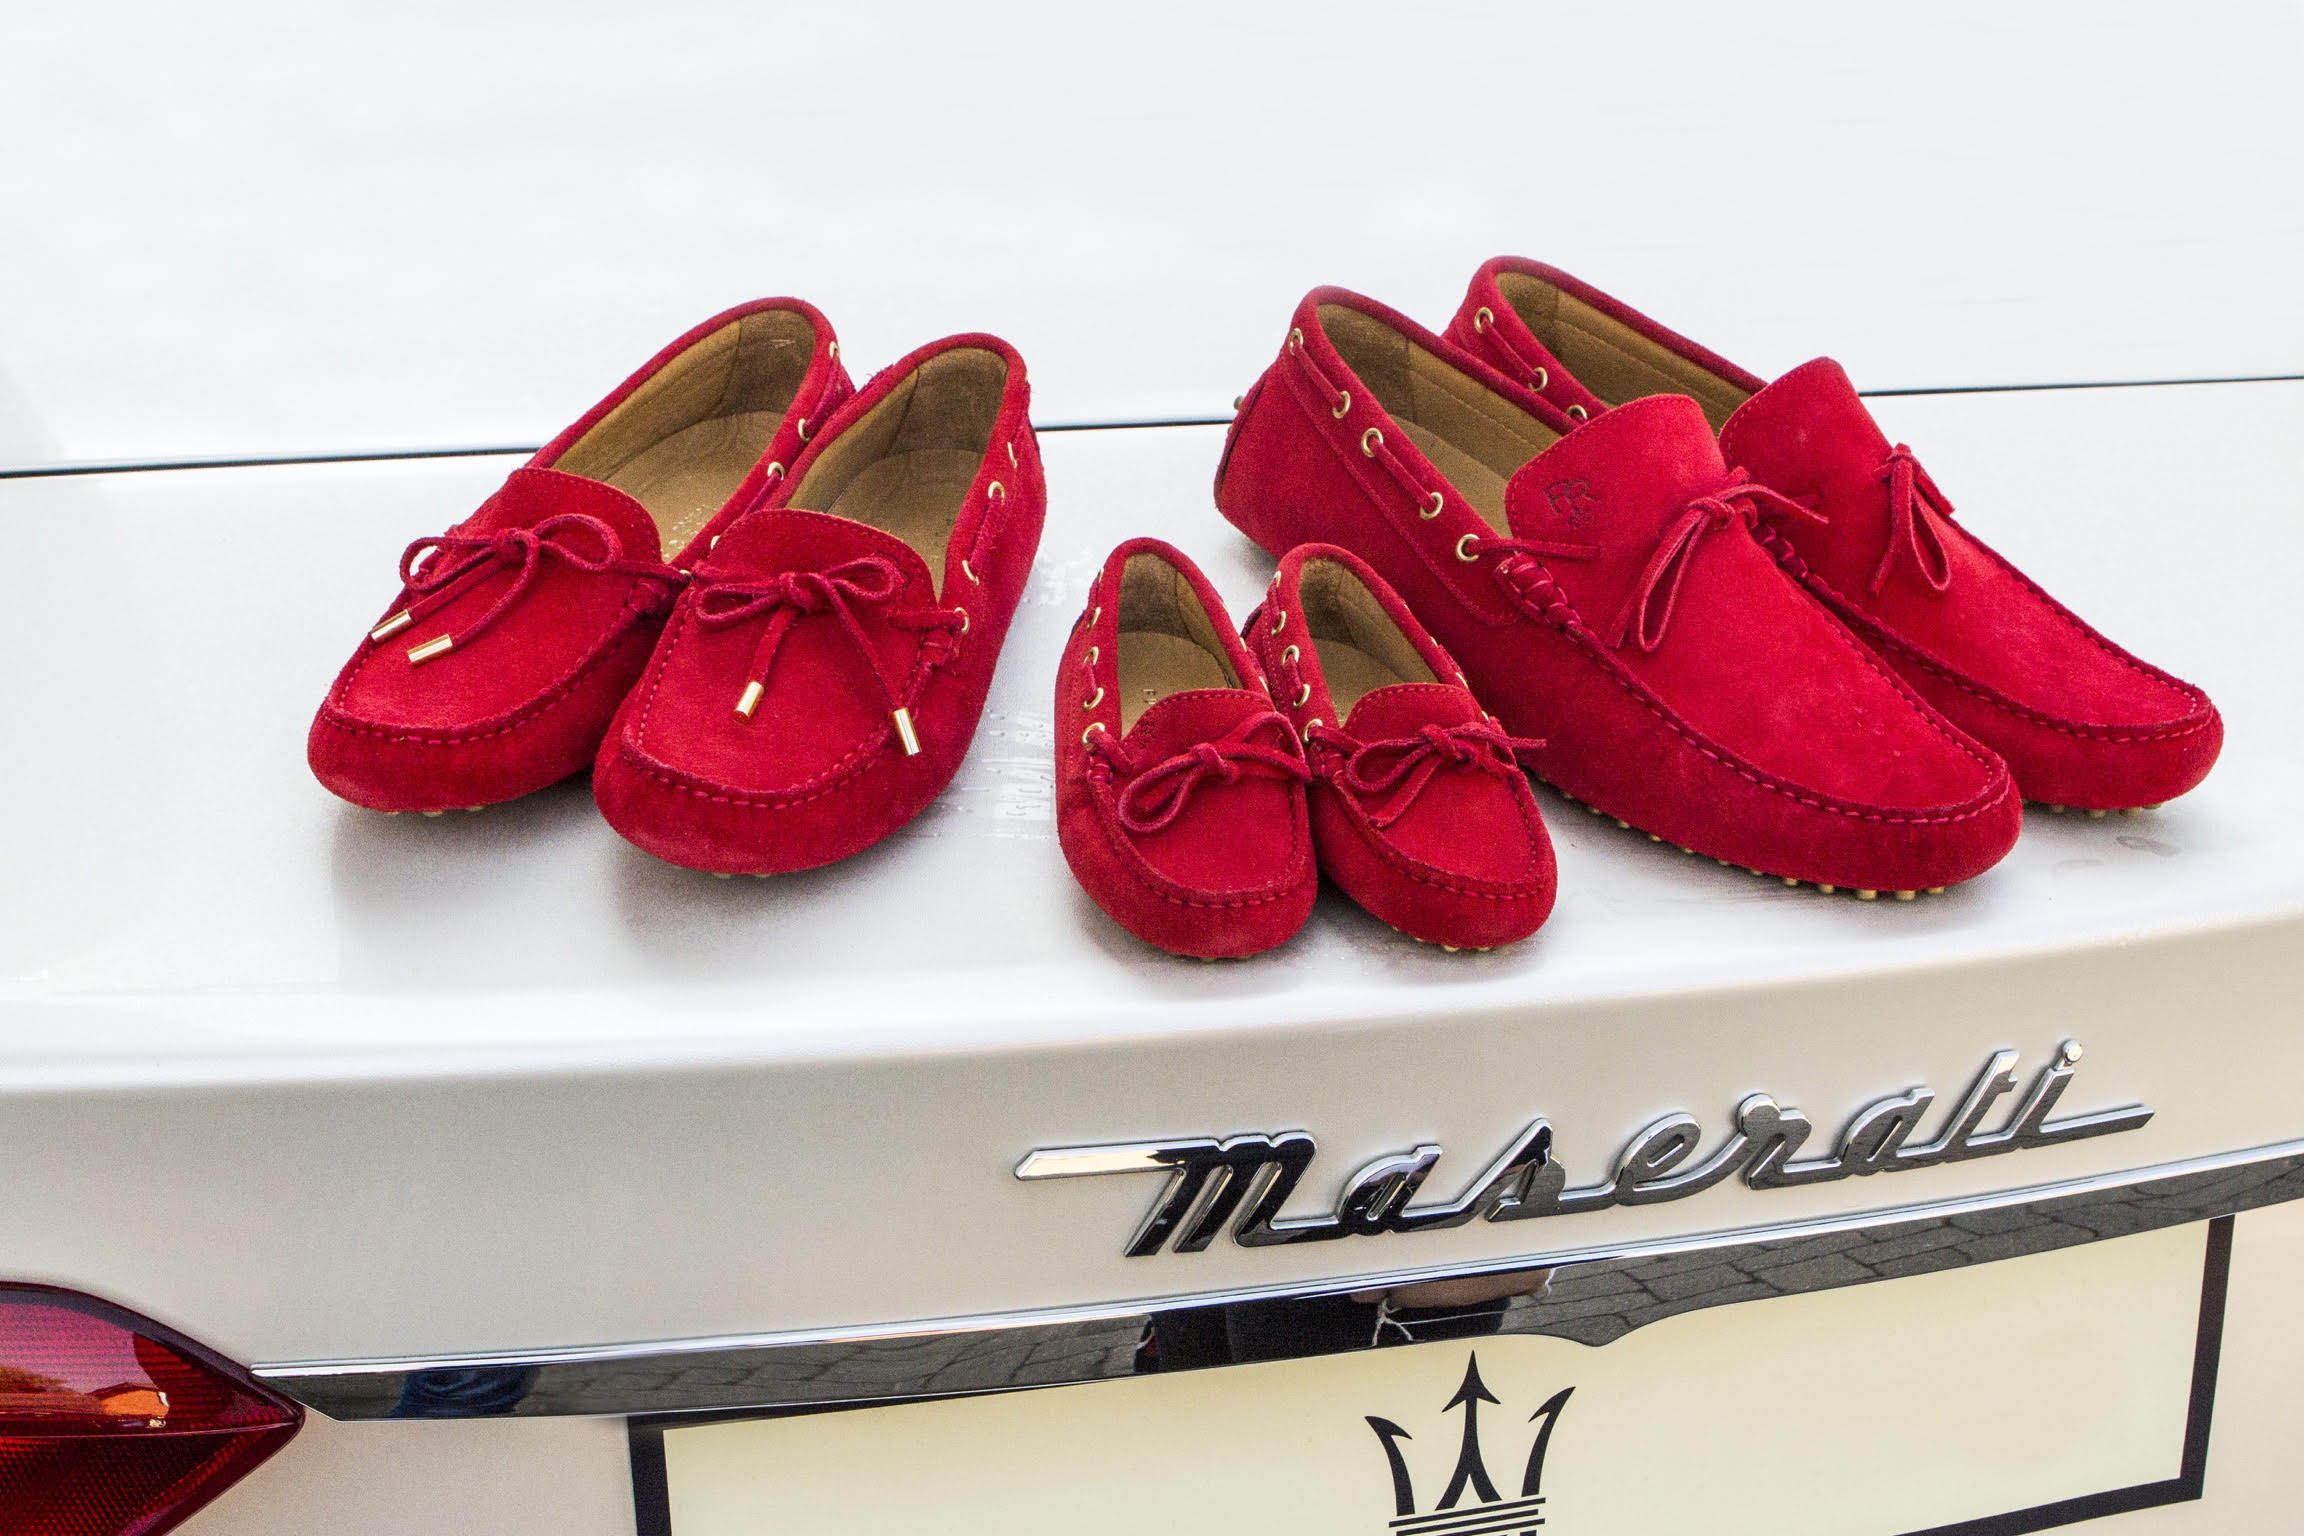 Pure Regal Luxury Footwear for the family - The Luxury Lifestyle Magazine